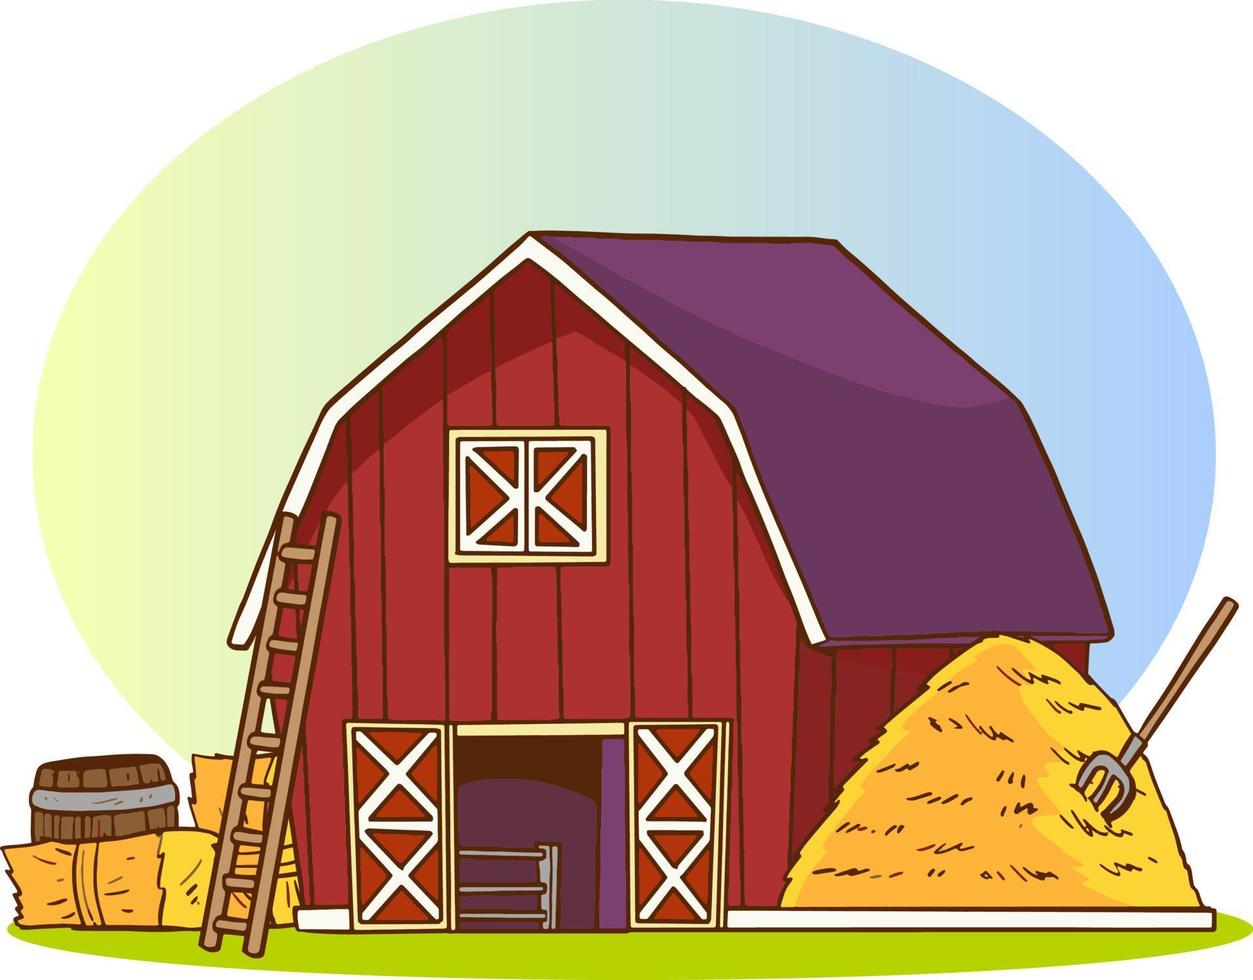 Cute farmhouse red house on a white background in cartoon style. Vector illustration with stable and barn.